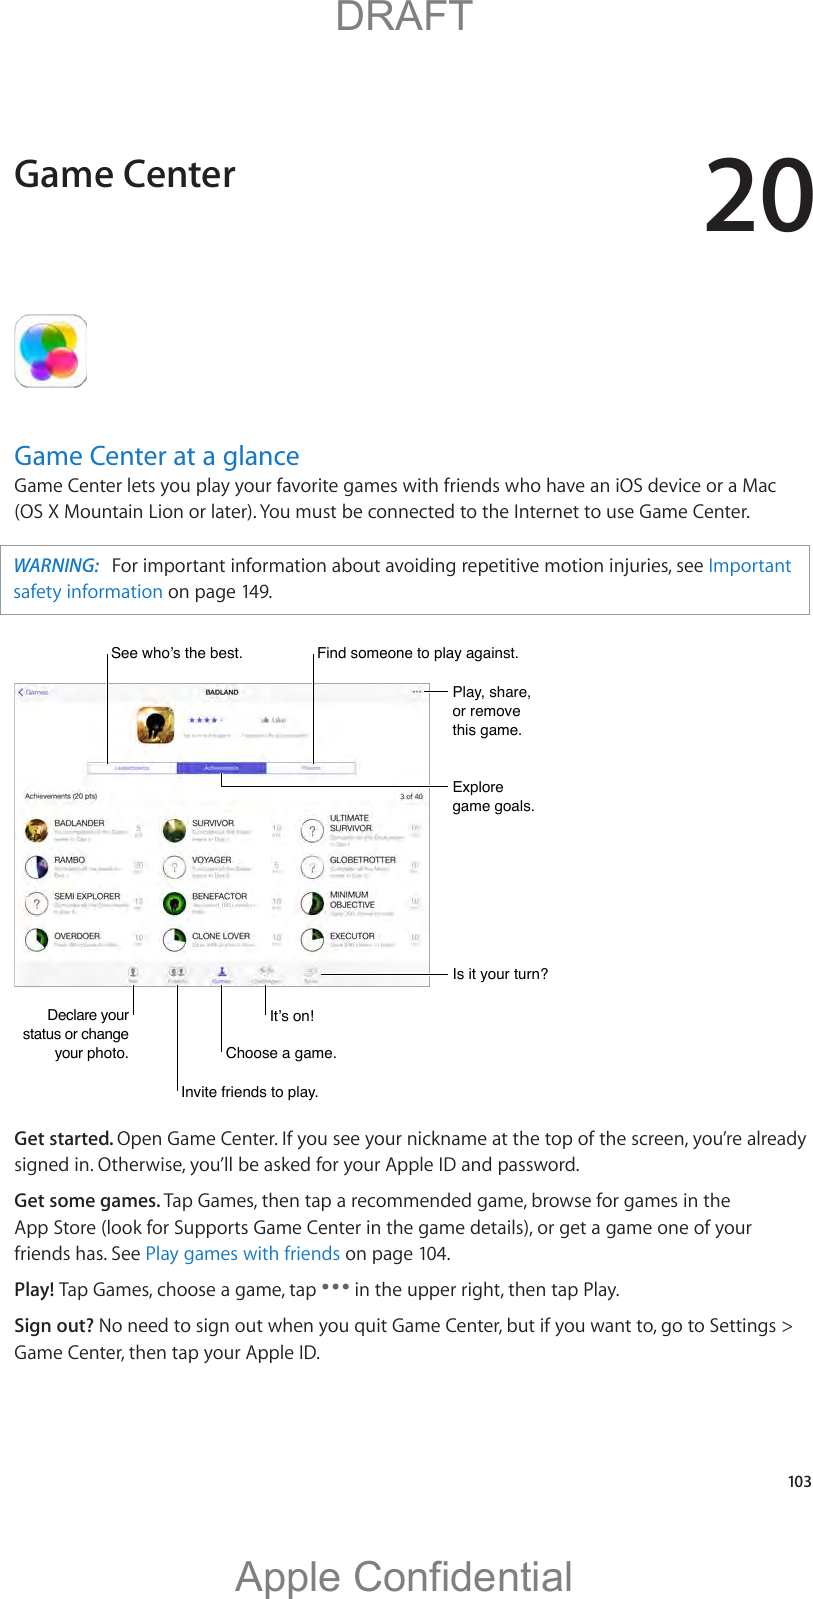 20   103Game Center at a glanceGame Center lets you play your favorite games with friends who have an iOS device or a Mac (OS X Mountain Lion or later). You must be connected to the Internet to use Game Center.WARNING:  (QTKORQTVCPVKPHQTOCVKQPCDQWVCXQKFKPITGRGVKVKXGOQVKQPKPLWTKGUUGGImportant safety information on page 149.Declare your status or change your photo.Declare your status or change your photo.6HHZKR·VWKHEHVW6HHZKR·VWKHEHVWPlay, share, or remove this game.Play, share, or remove this game.Explore game goals.Explore game goals.Is it your turn?Is it your turn?Invite friends to play.Invite friends to play.Choose a game.Choose a game.,W·VRQ,W·VRQFind someone to play against.Find someone to play against.Get started. Open Game Center. If you see your nickname at the top of the screen, you’re already signed in. Otherwise, you’ll be asked for your Apple ID and password.Get some games. Tap Games, then tap a recommended game, browse for games in the App Store (look for Supports Game Center in the game details), or get a game one of your friends has. See Play games with friends on page 104.Play! Tap Games, choose a game, tap   in the upper right, then tap Play.Sign out? No need to sign out when you quit Game Center, but if you want to, go to Settings &gt; Game Center, then tap your Apple ID.Game Center          DRAFTApple Confidential